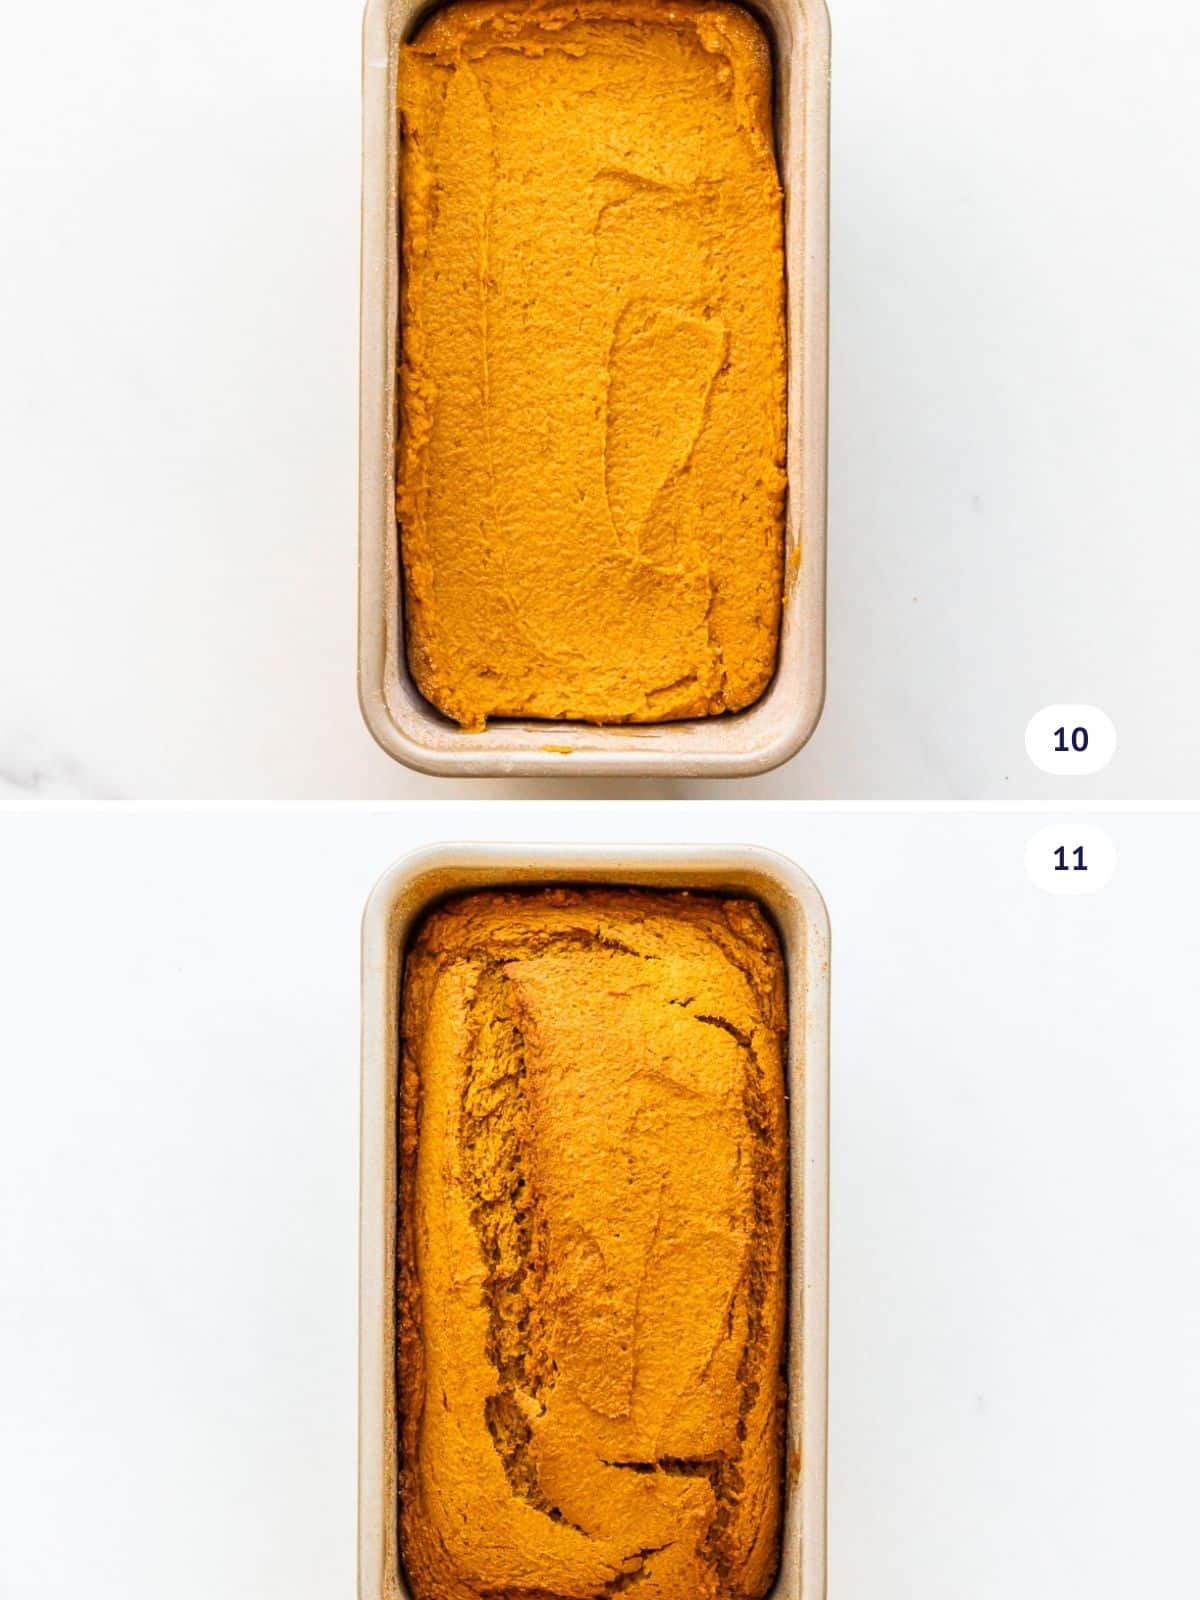 Whole wheat pumpkin bread before and after baking.